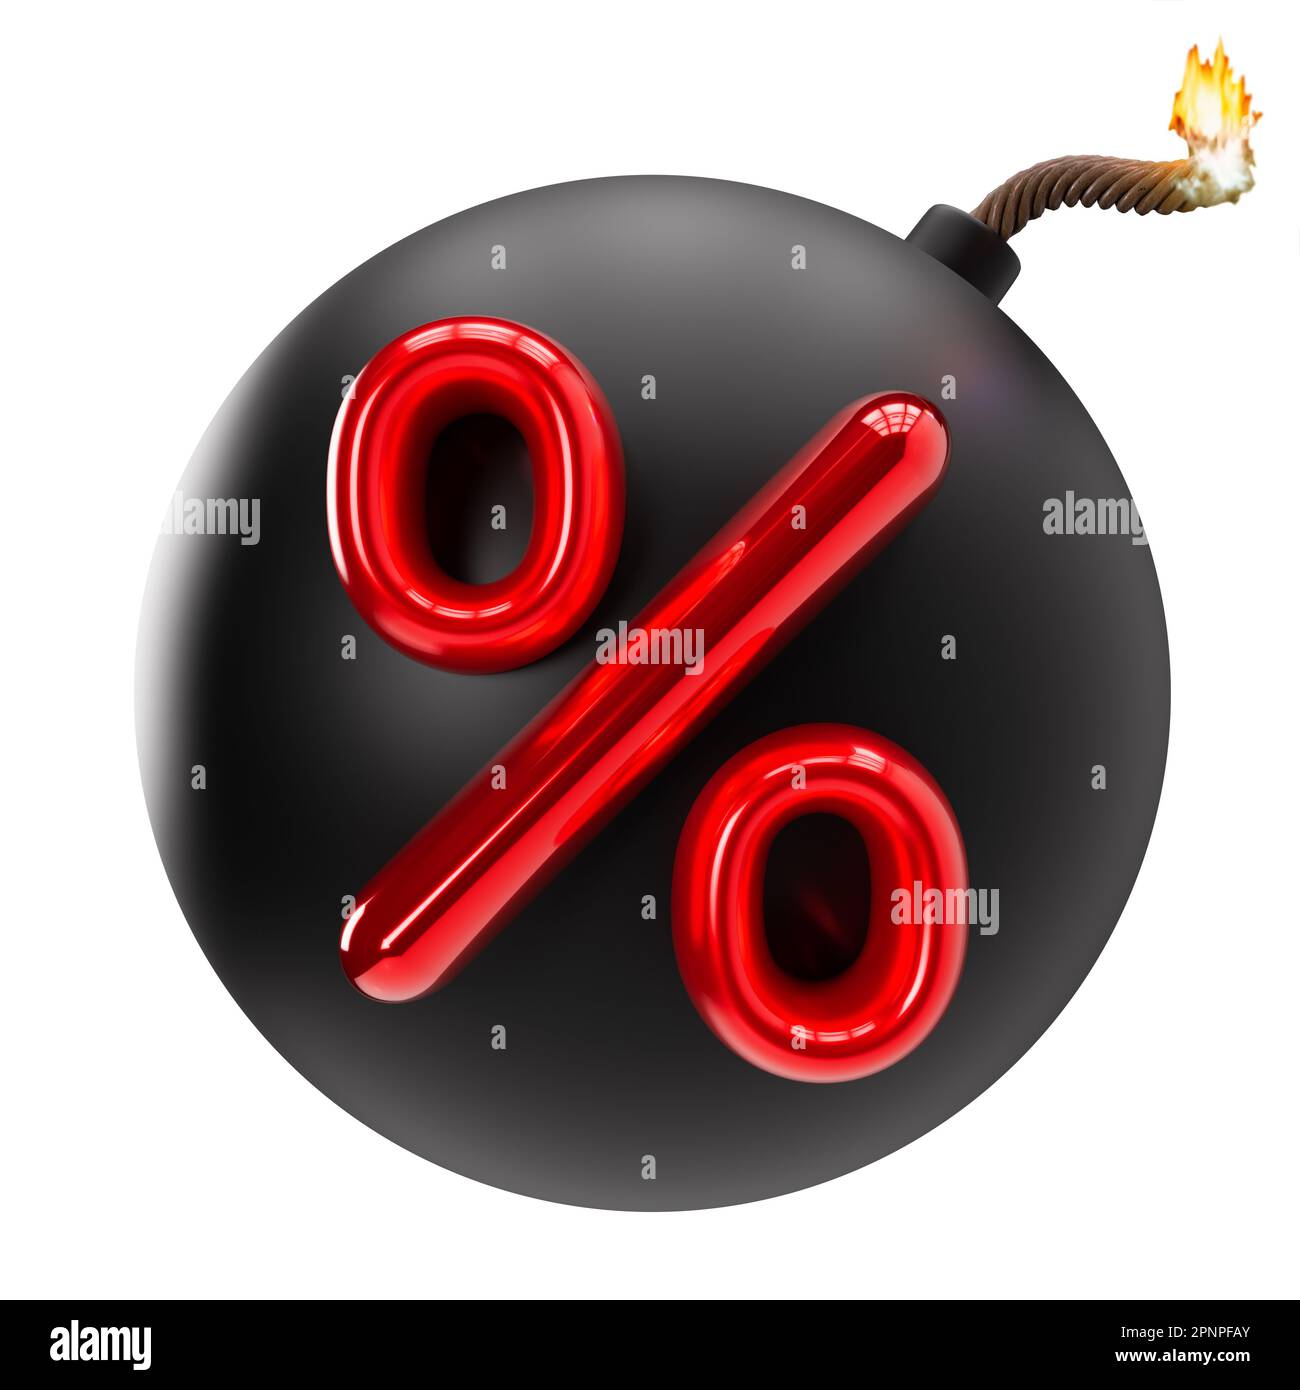 Percent discount 3D illustration isolated on white background. Sale, special offer, good price, deal, shopping. Price explosion. Cut out red and black Stock Photo